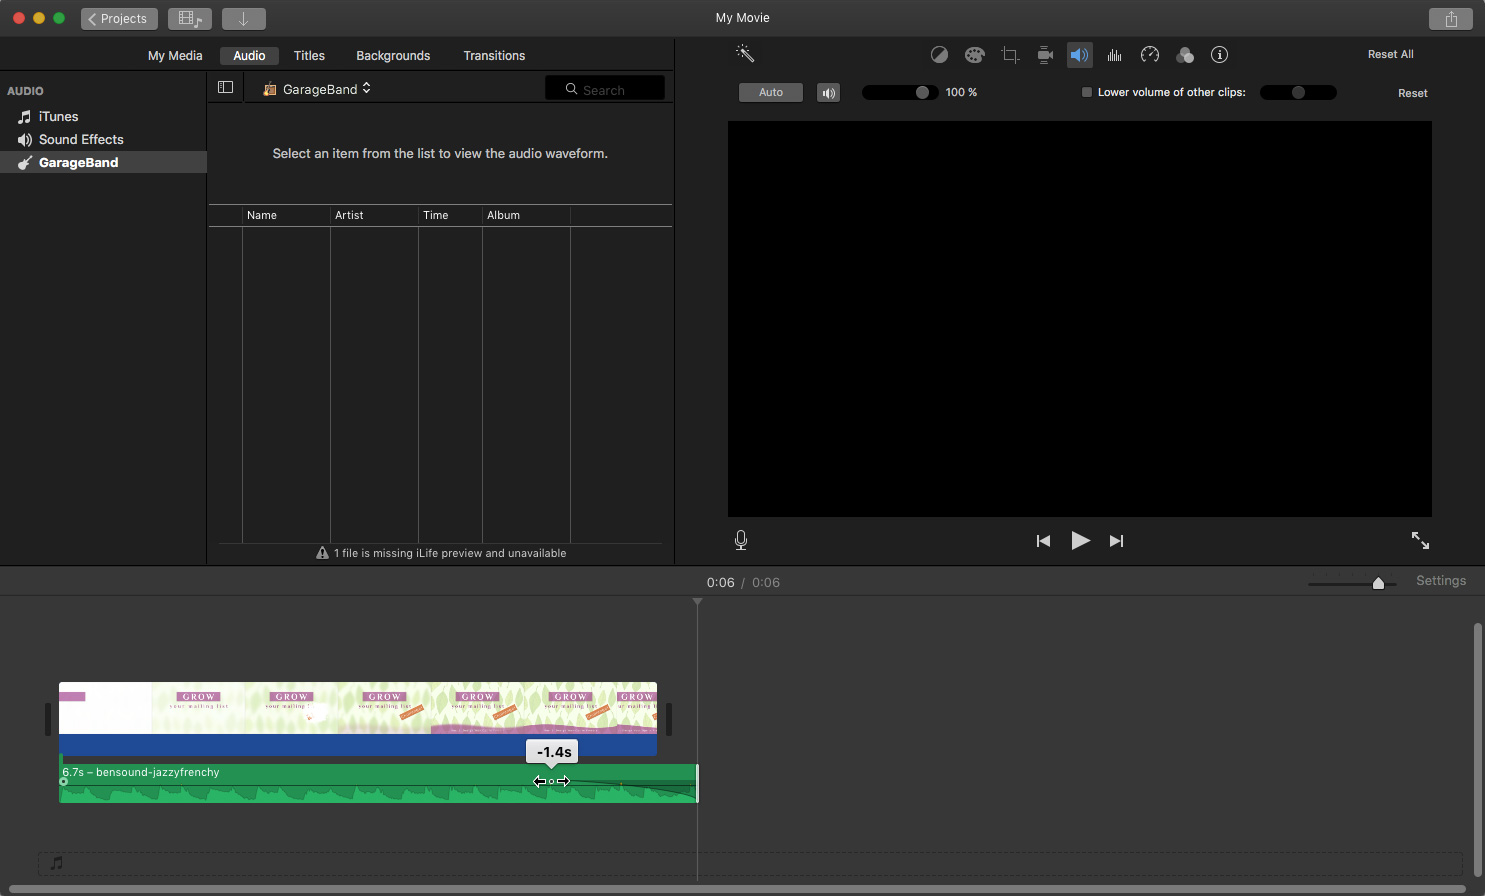 iMovie: Fading out the music track